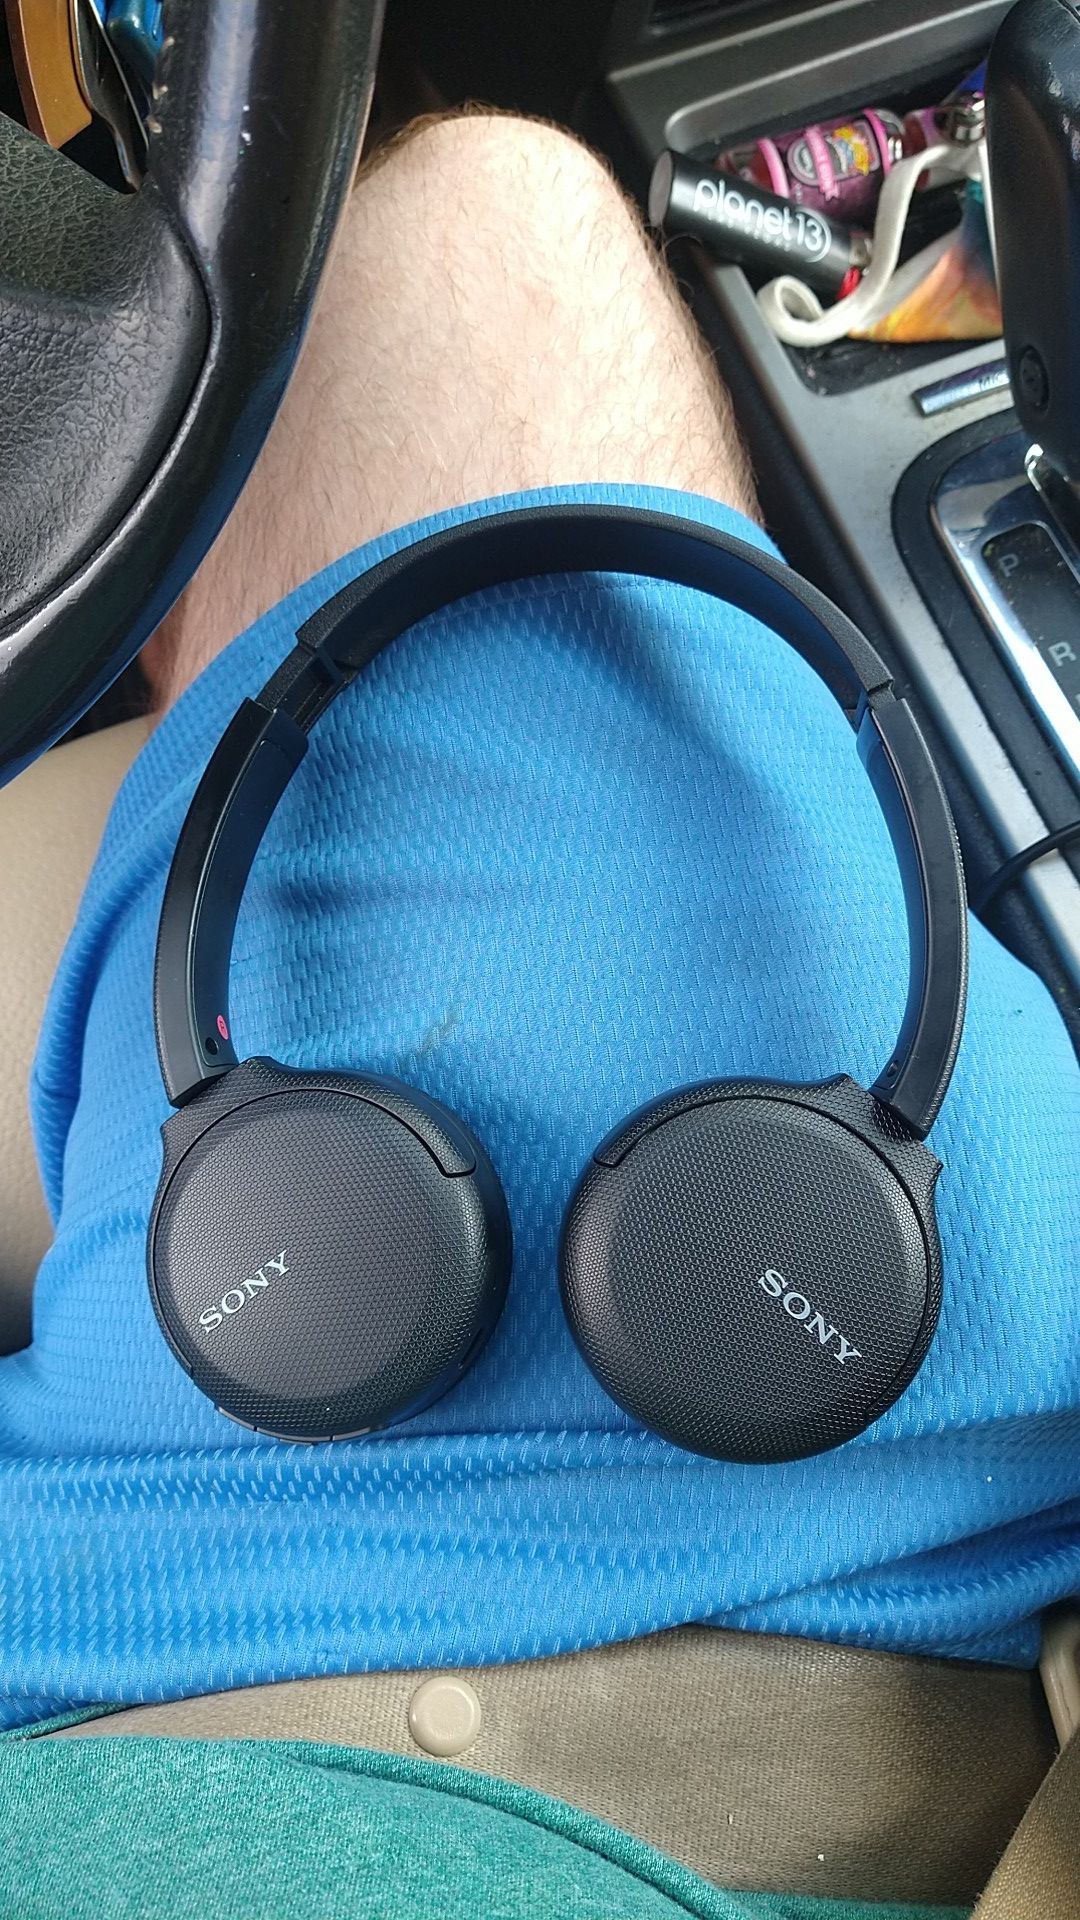 Sony wireless headphones and Quikcell ear buds